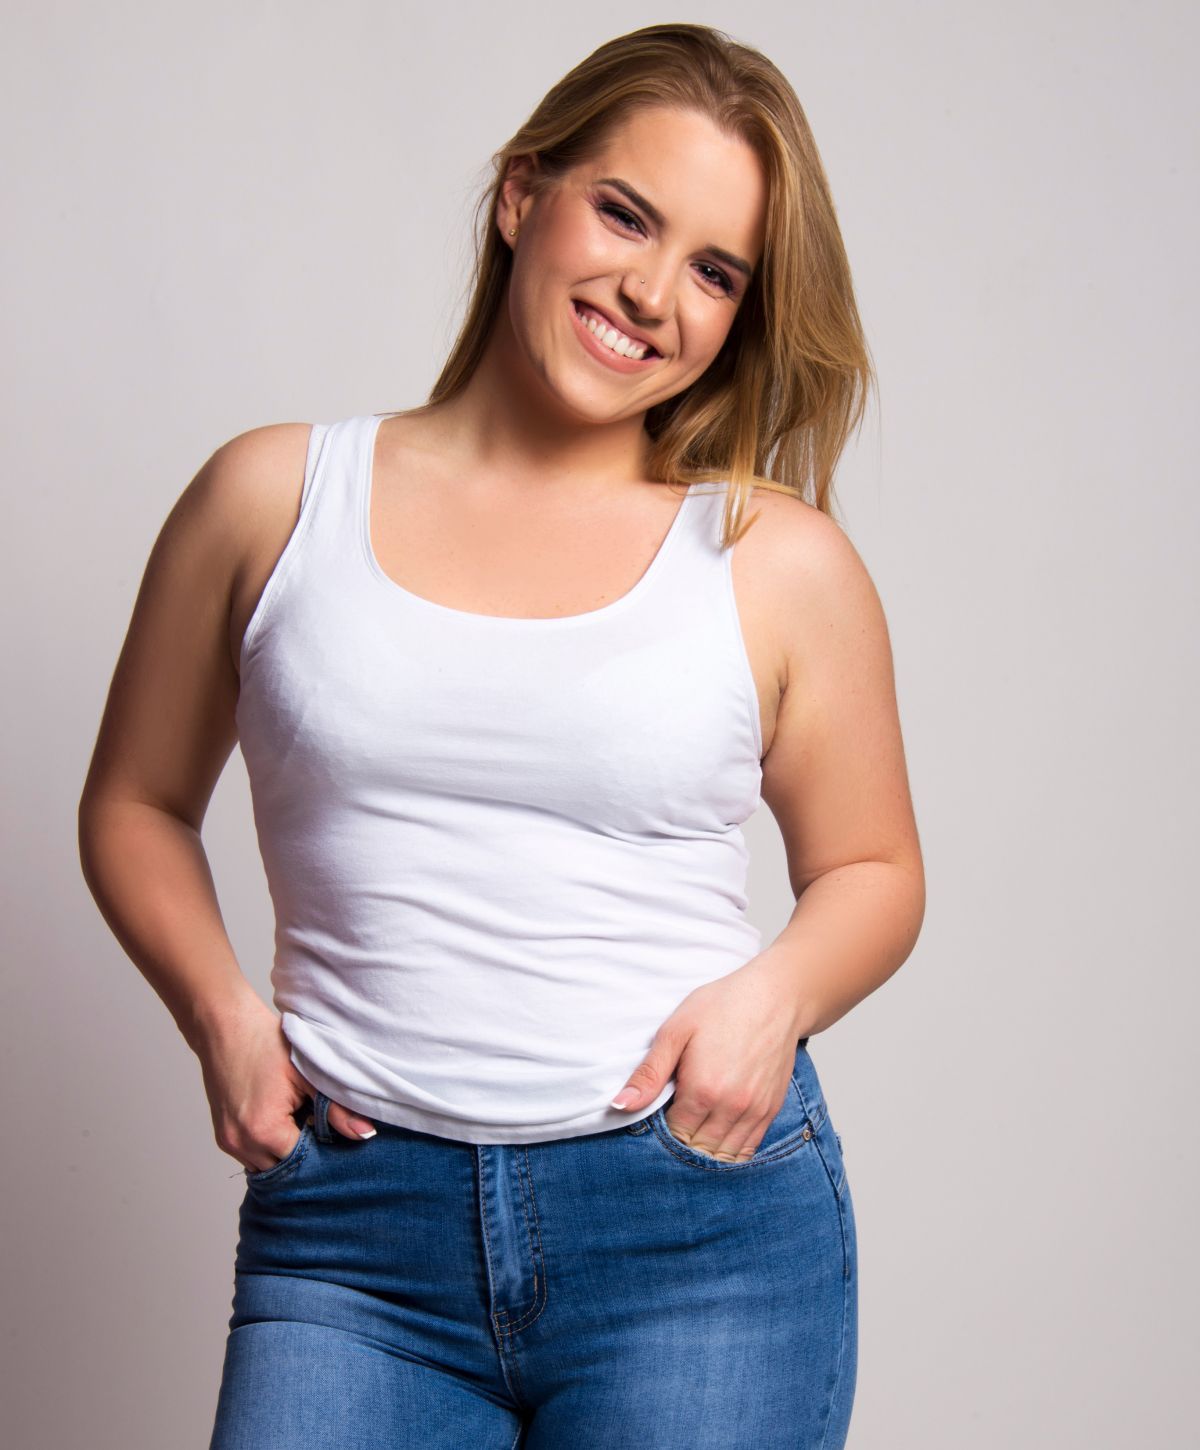 Franklin fat reduction model with blonde hair